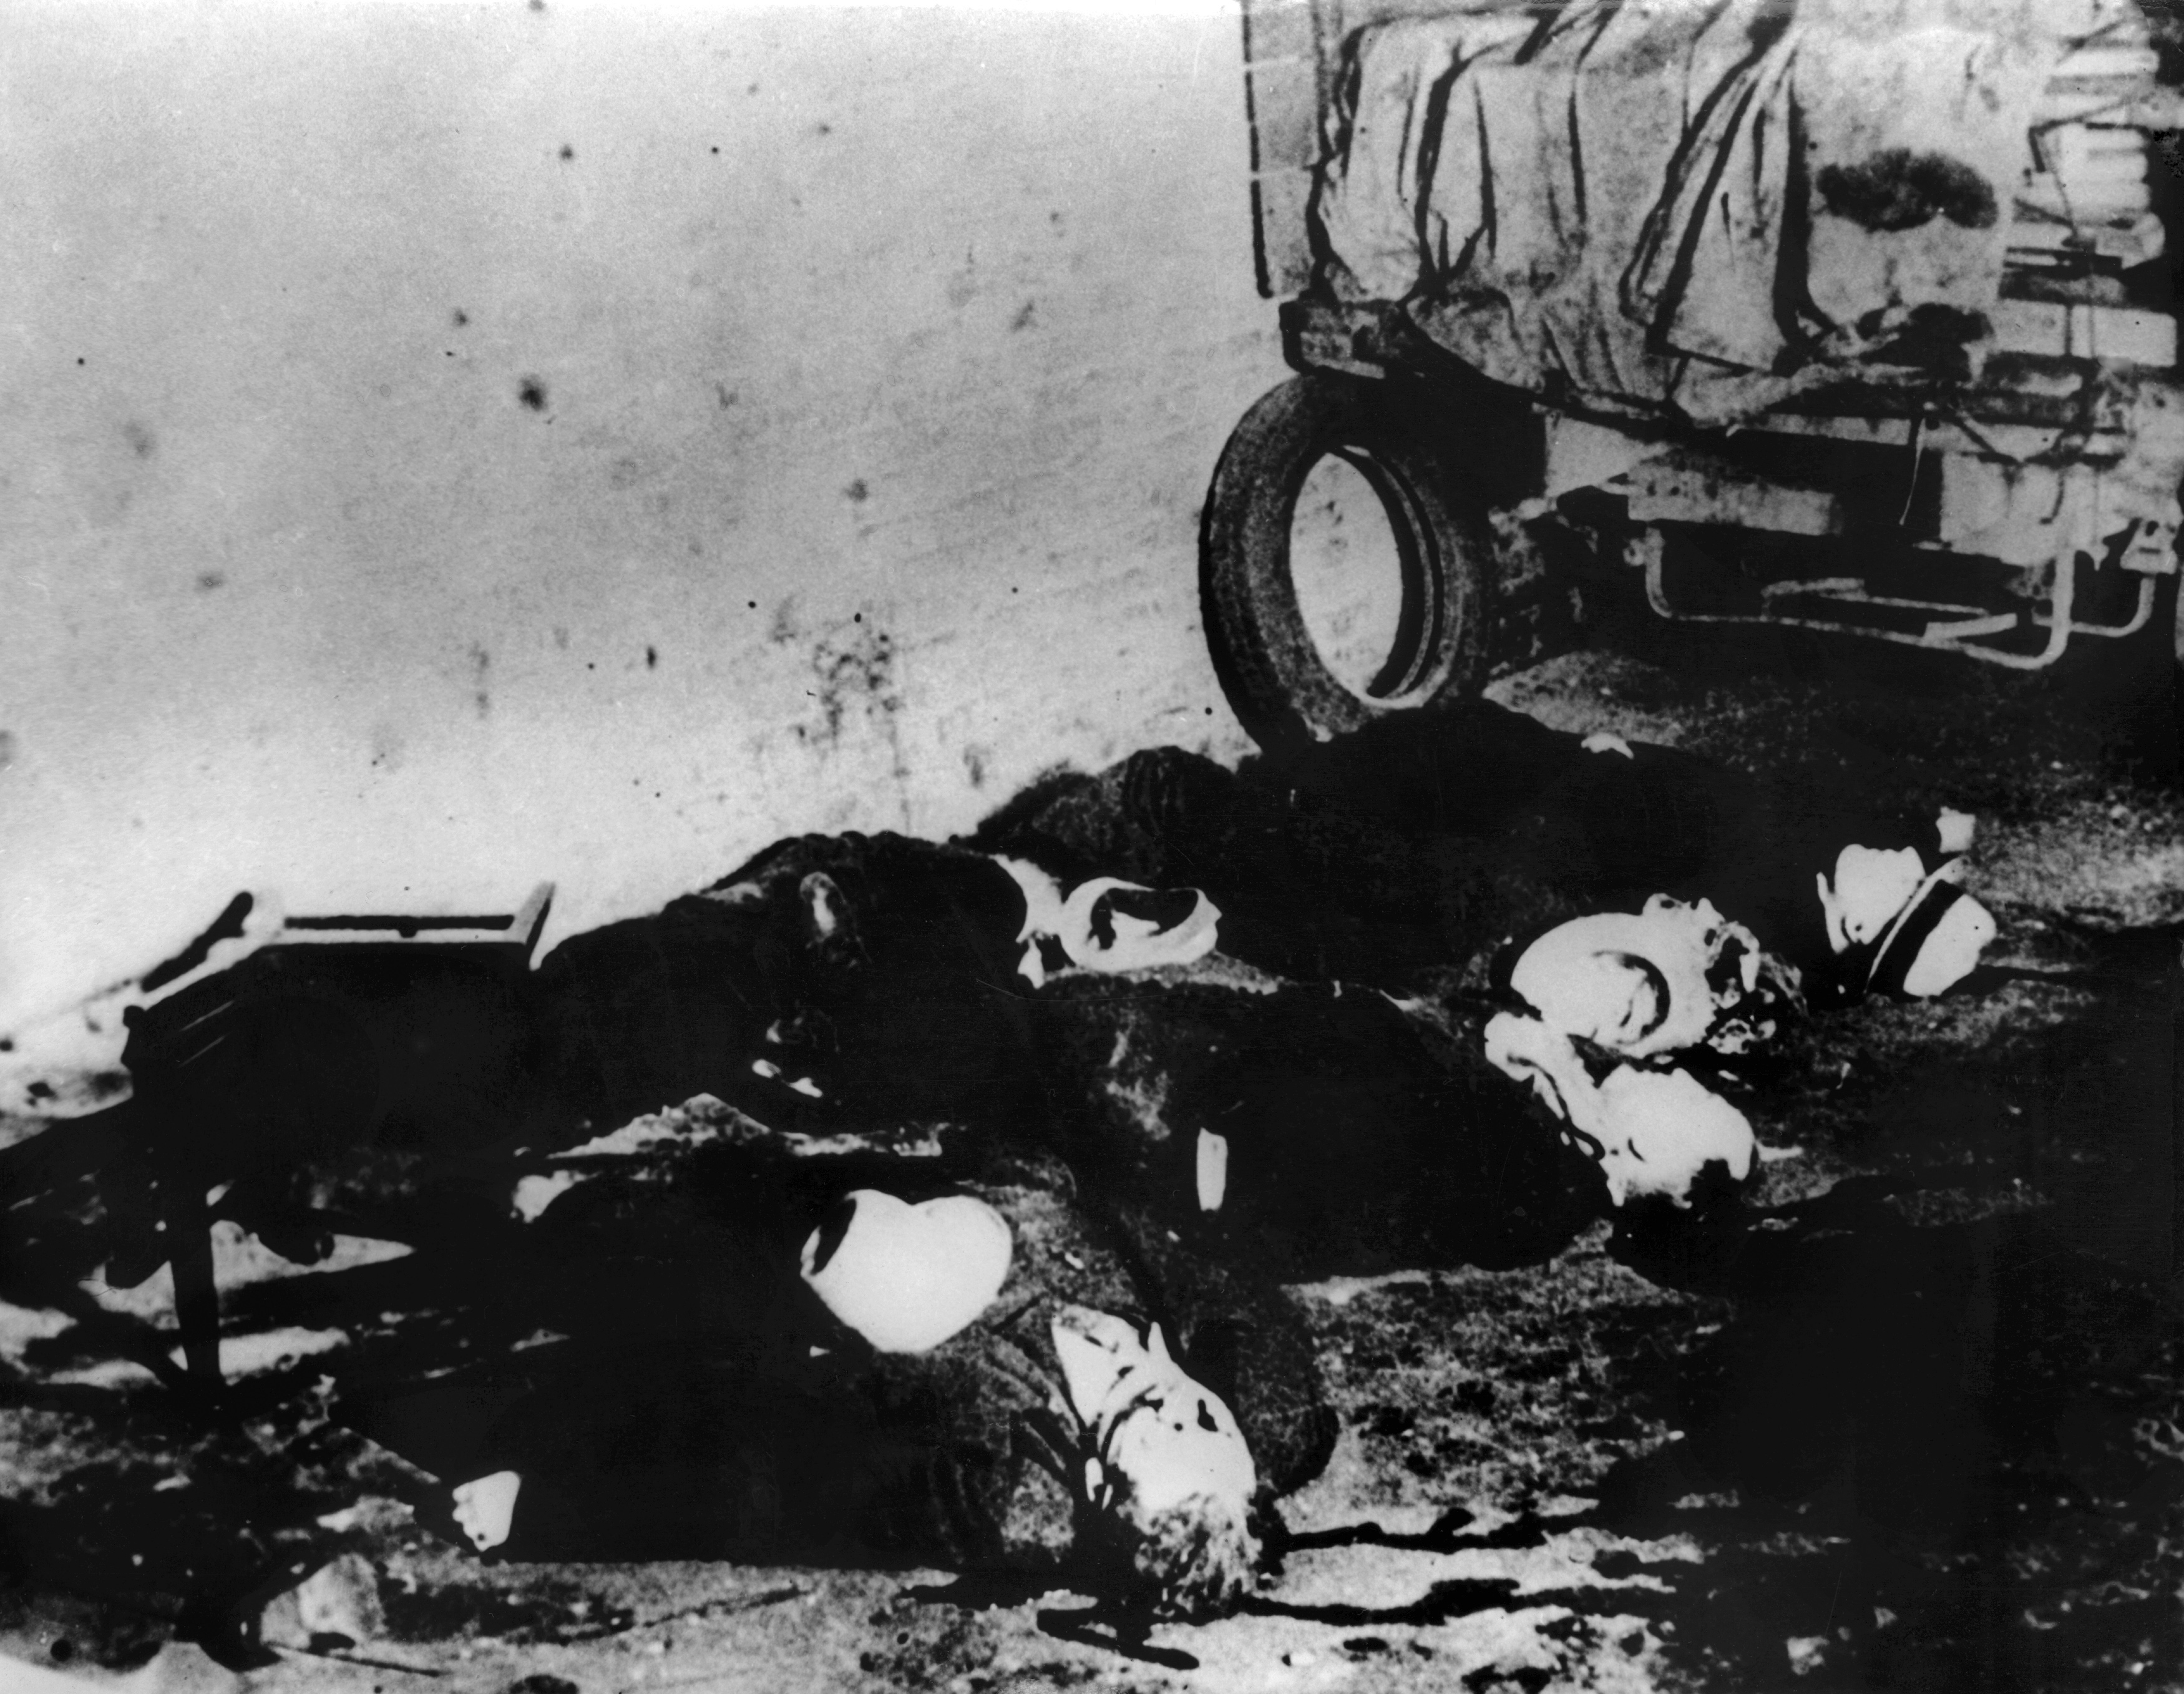 Autopsy reports found from 1929 Valentine's Day massacre - CBS News